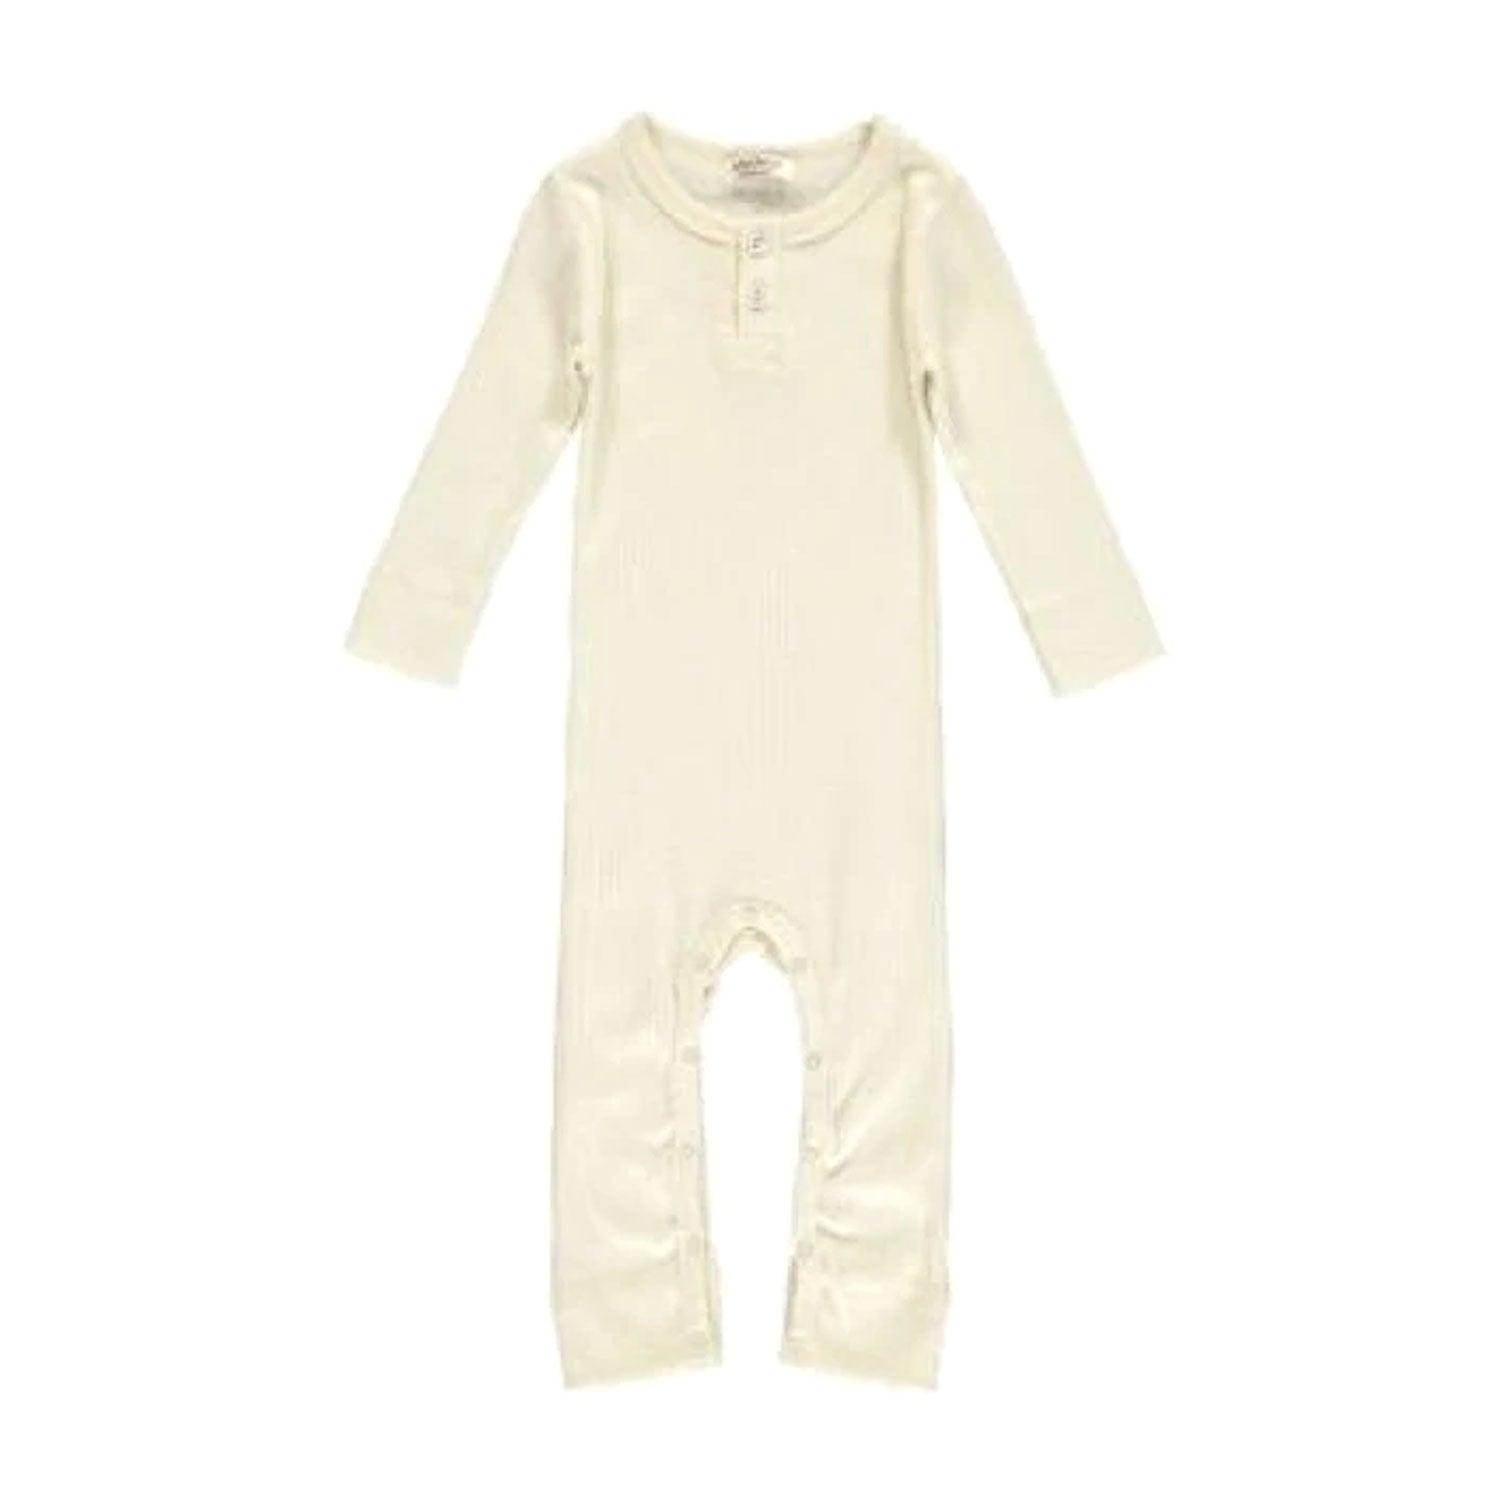 An image of Baby Jumpsuit - All in One Bodysuit | MarMar Copenhagen Off White / 9M/74CM